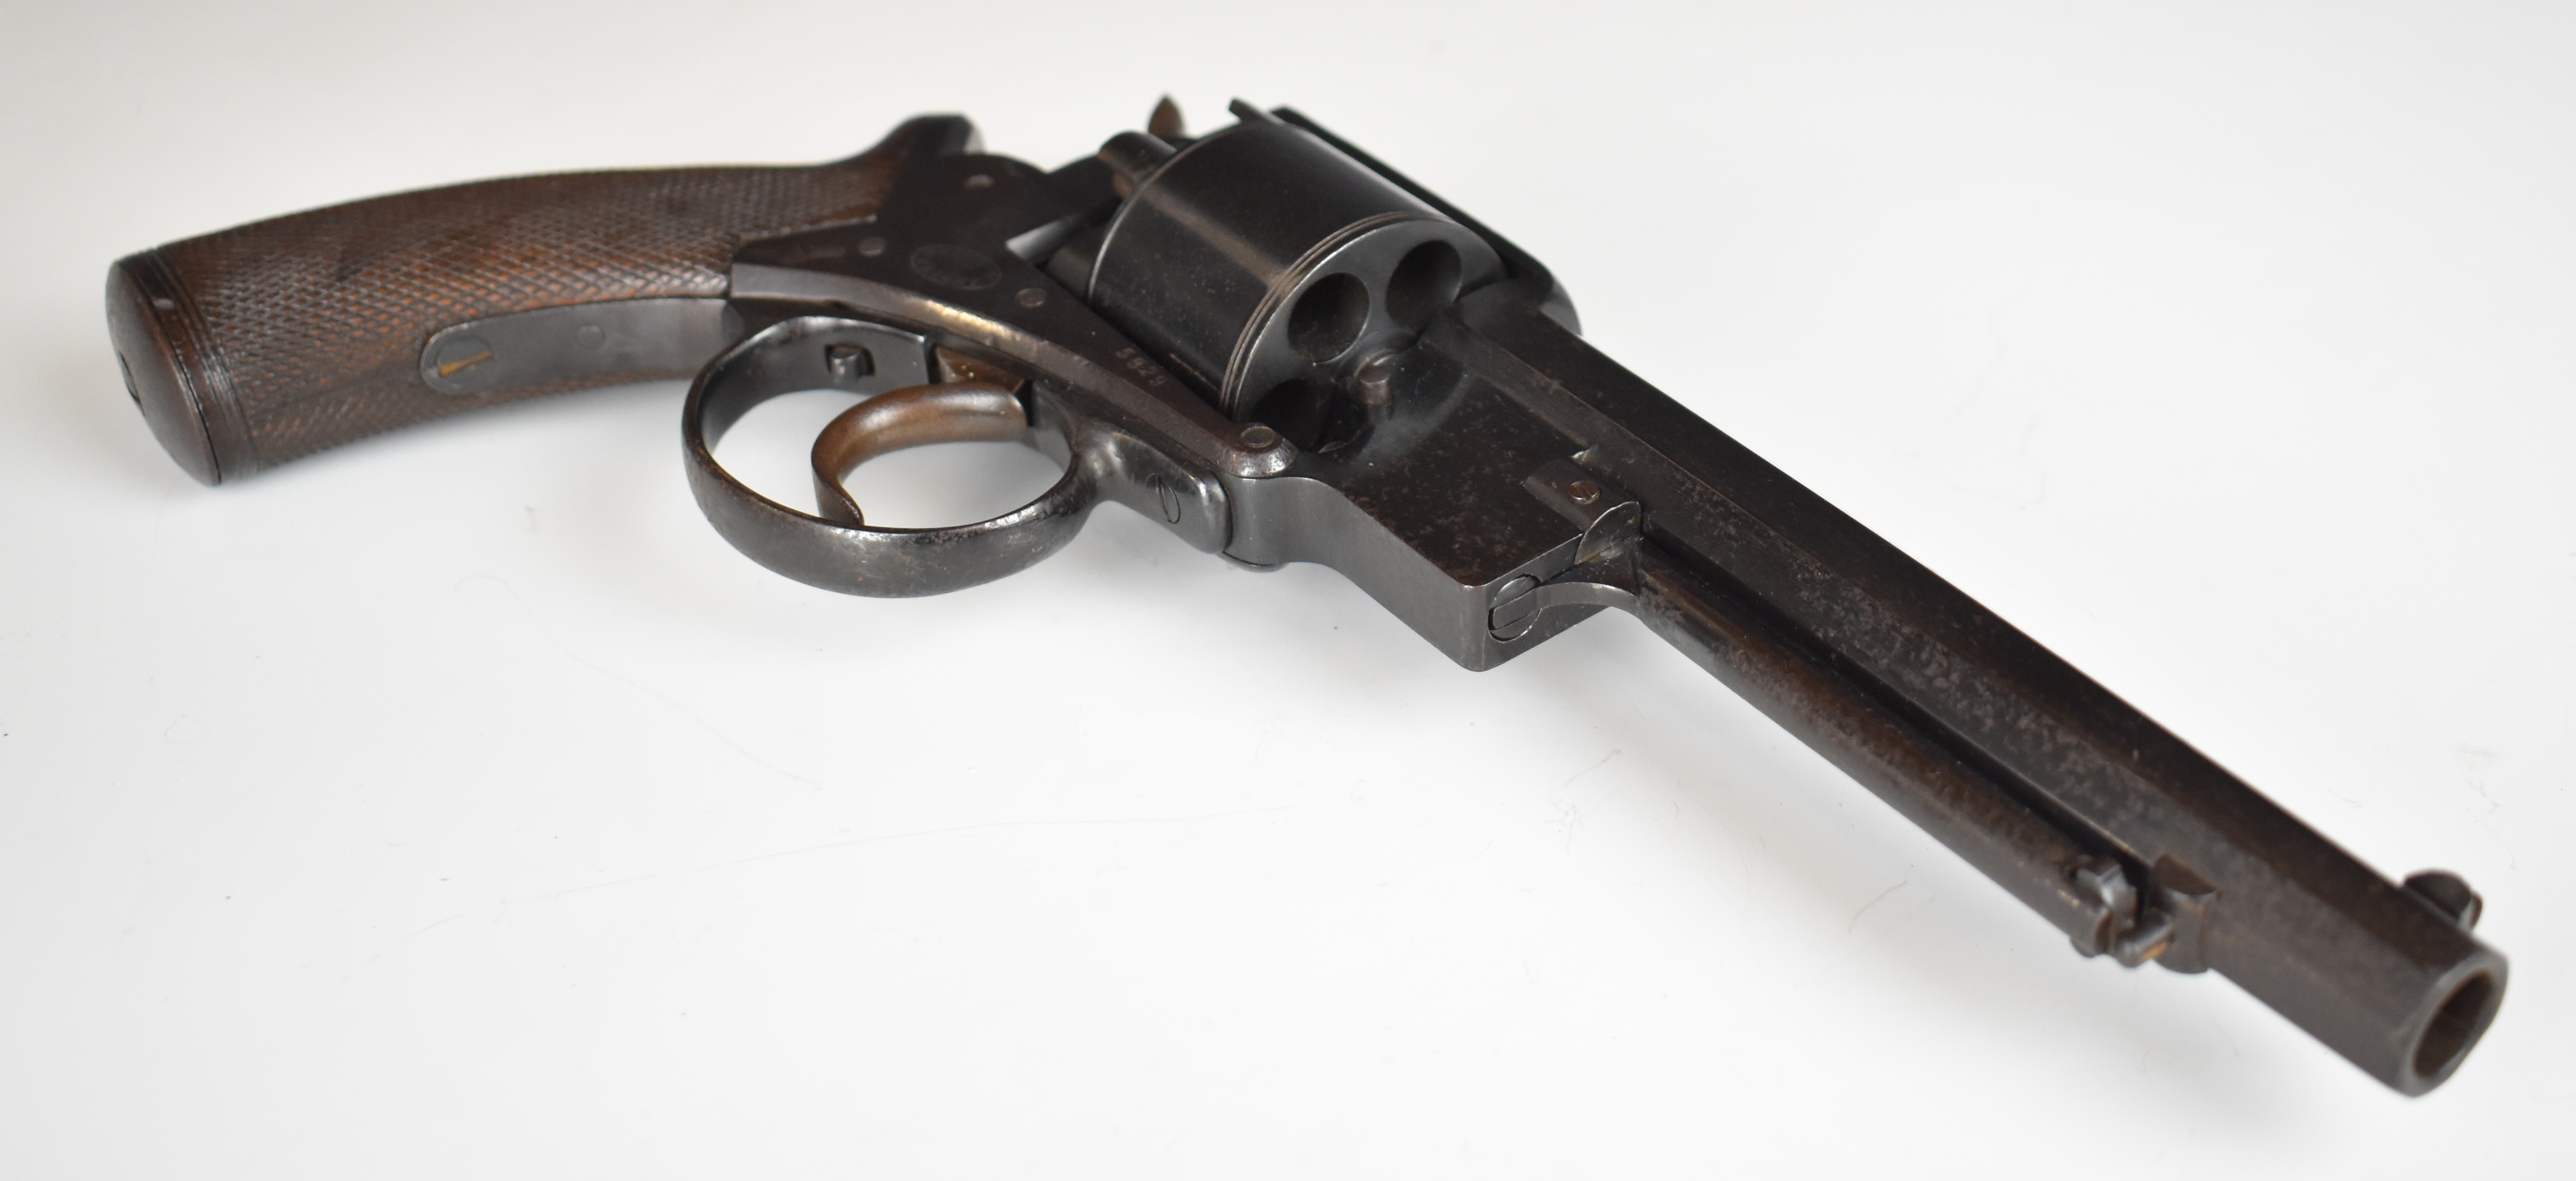 Adam's Patent 50 bore six-shot double-action revolver with chequered grip, line engraved cylinder, - Image 19 of 30